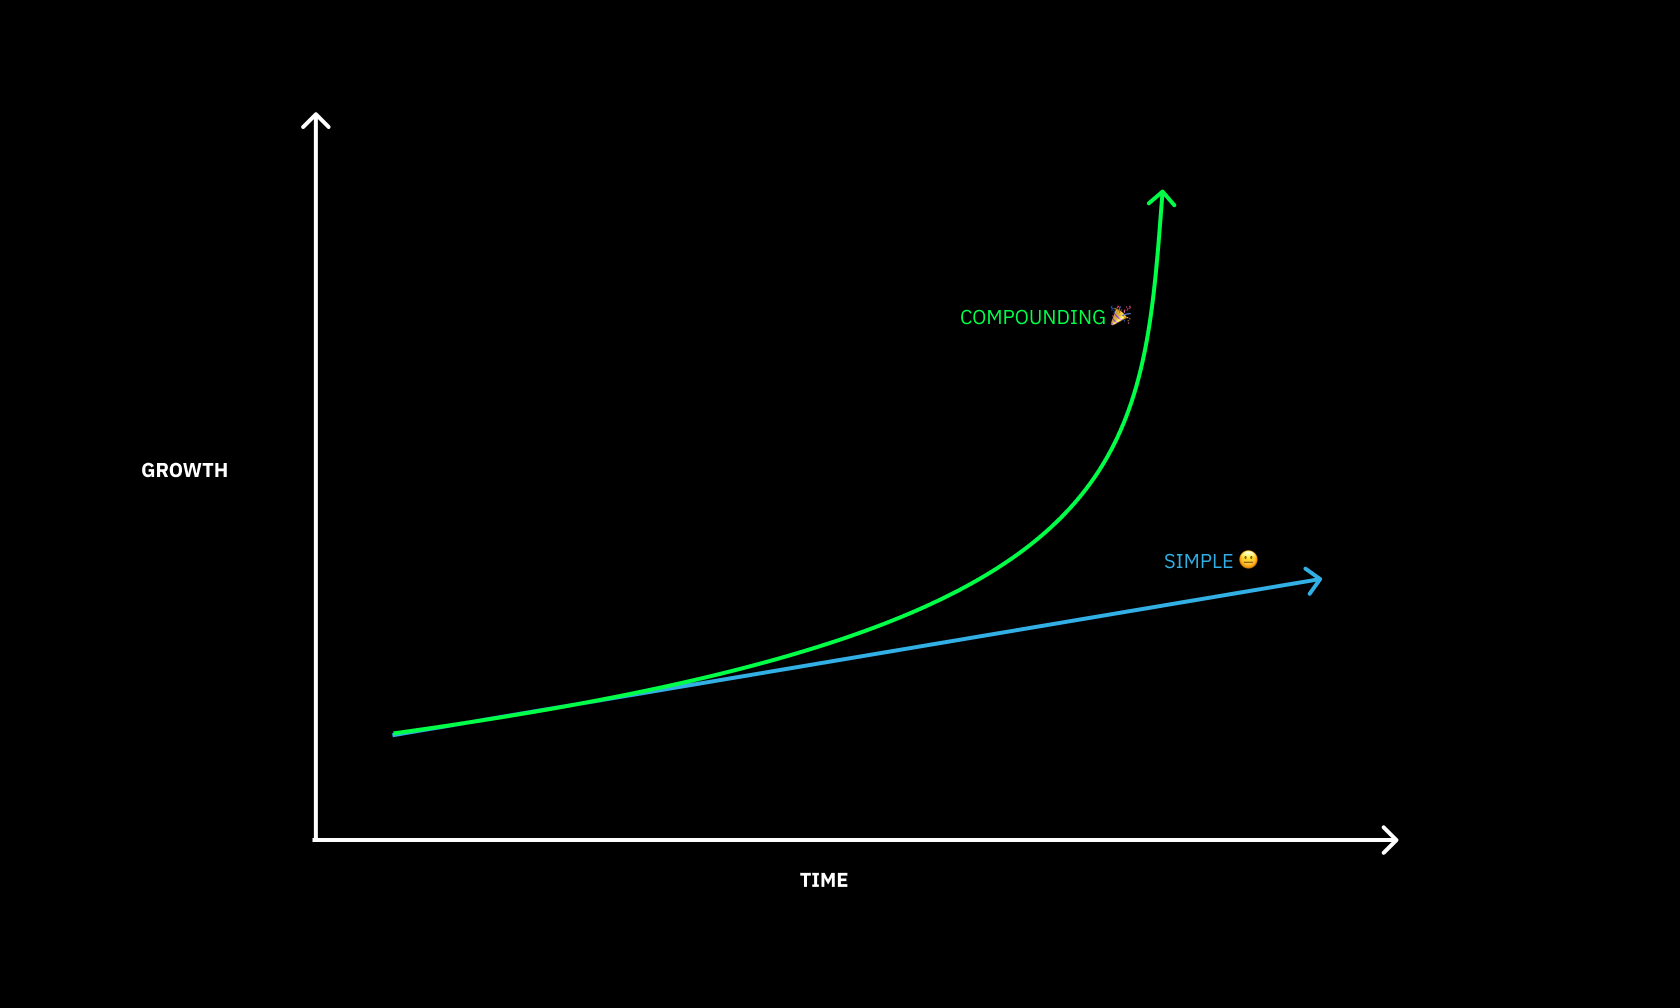 The secret of exponential growth: Compounding!